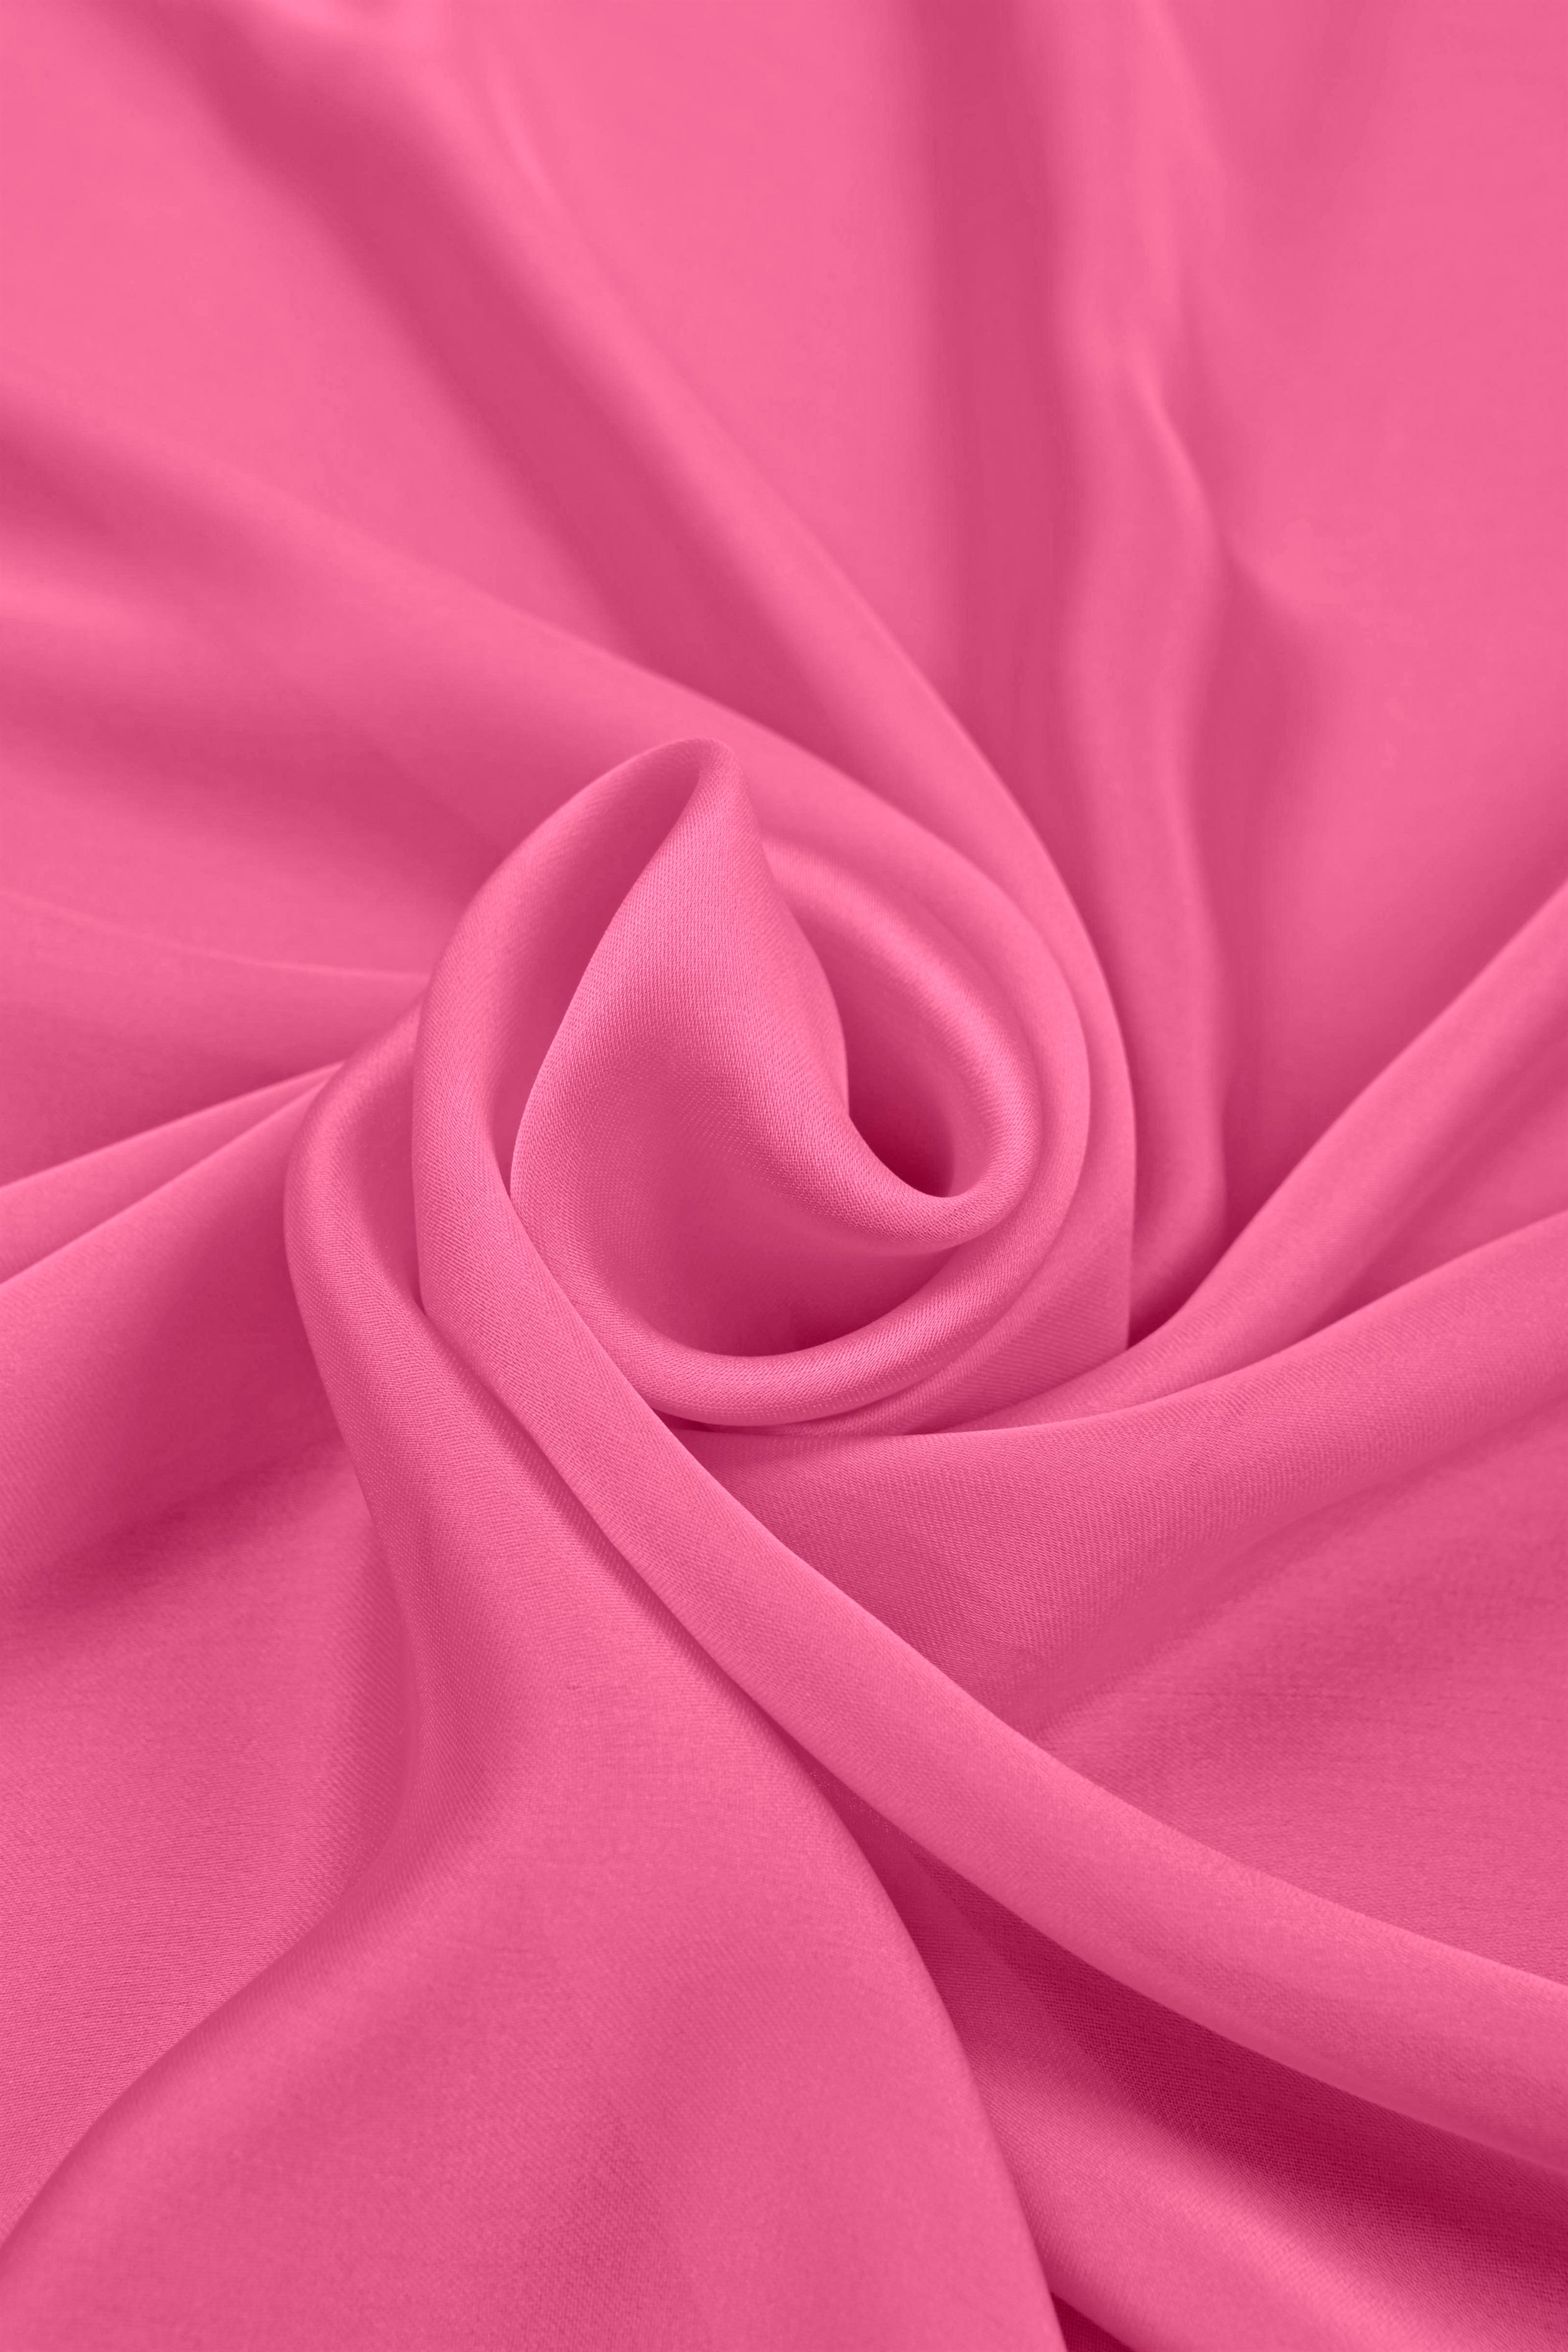 Light Pink Plain Dyed Satin Georgette Fabric